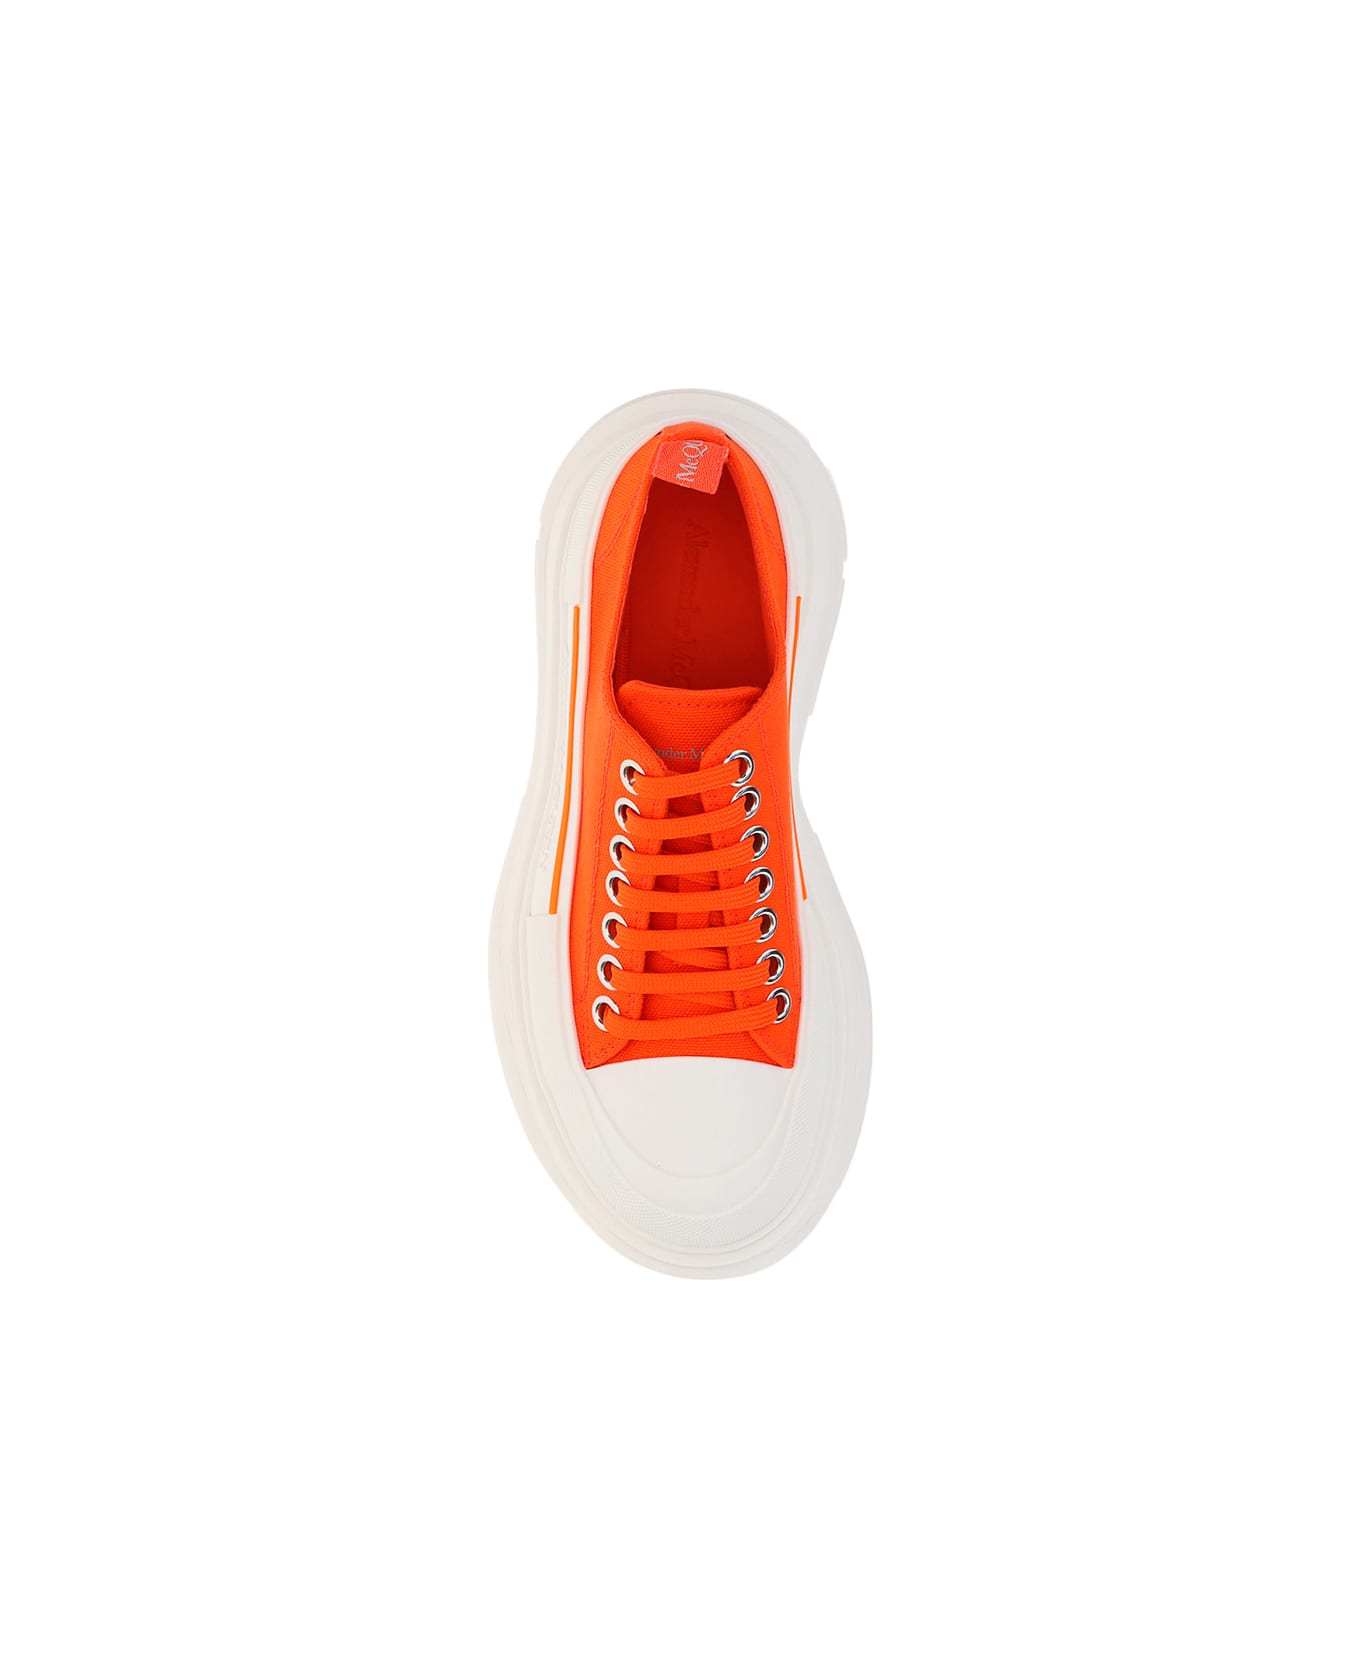 Alexander McQueen Tread Slick Sneakers - Lu.or/of.wh/l.o./si ウェッジシューズ